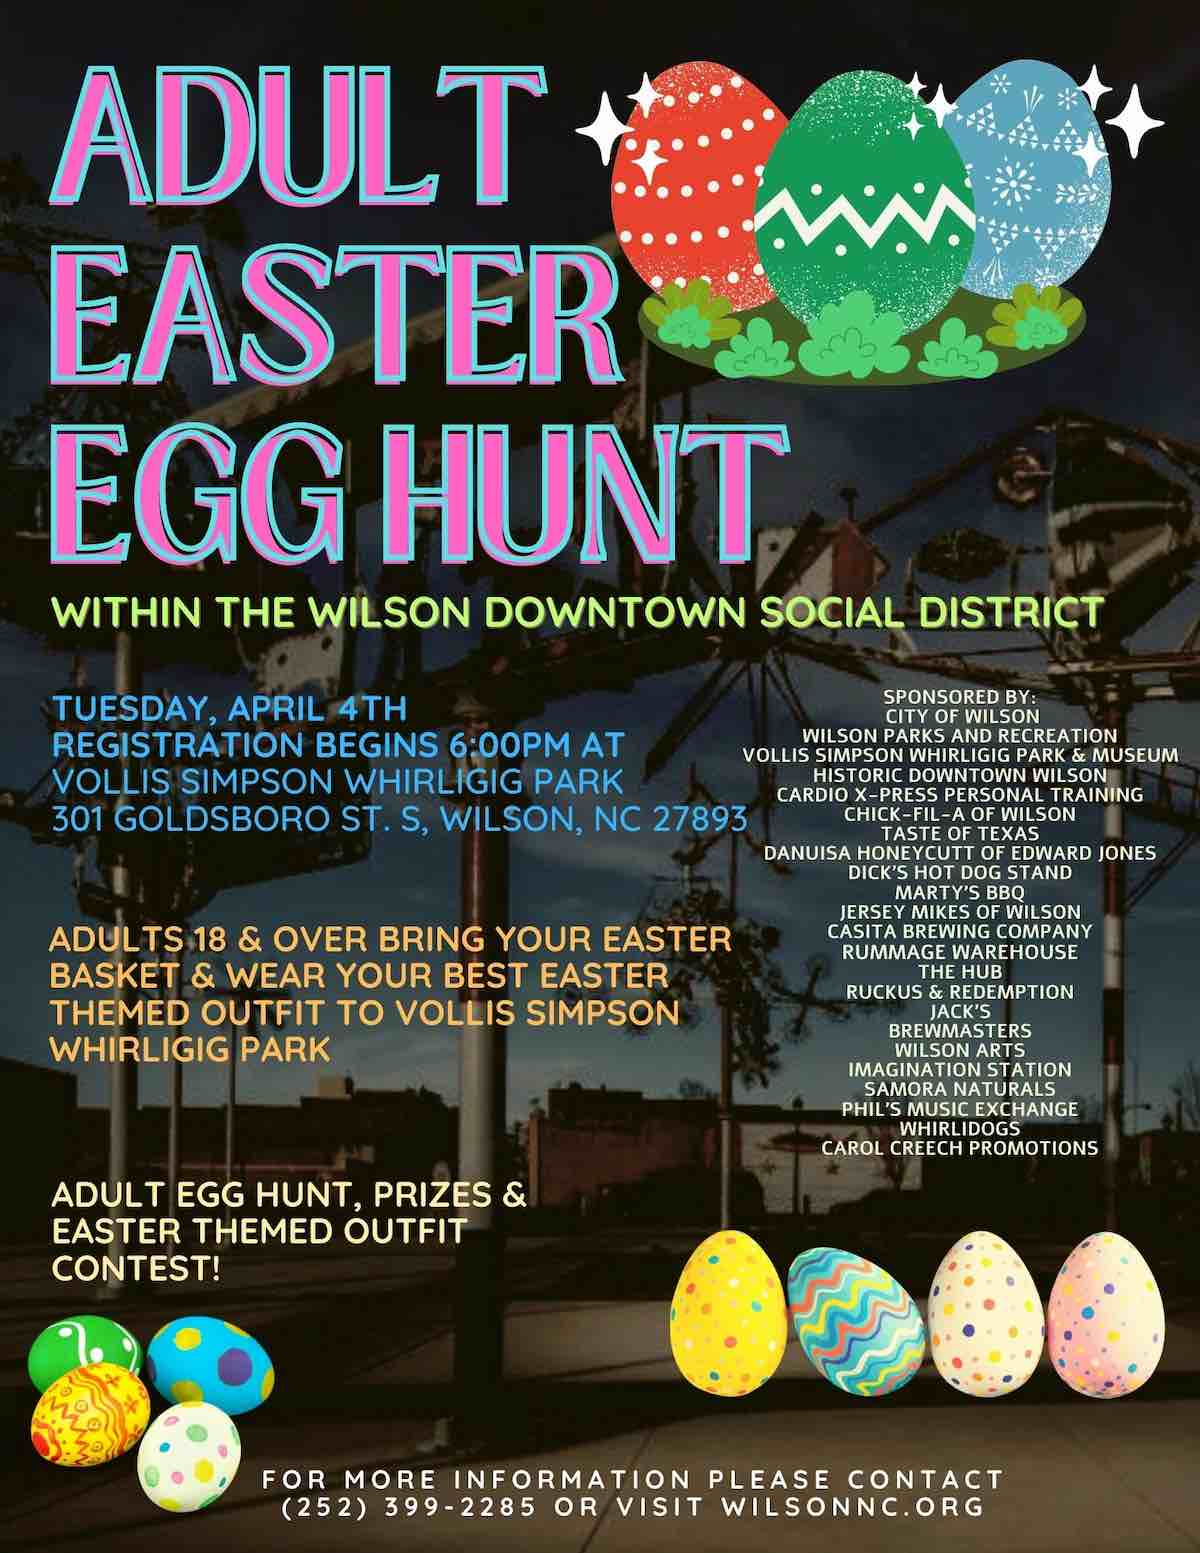 Adult Easter Egg Hunt in Wilson Triangle on the Cheap